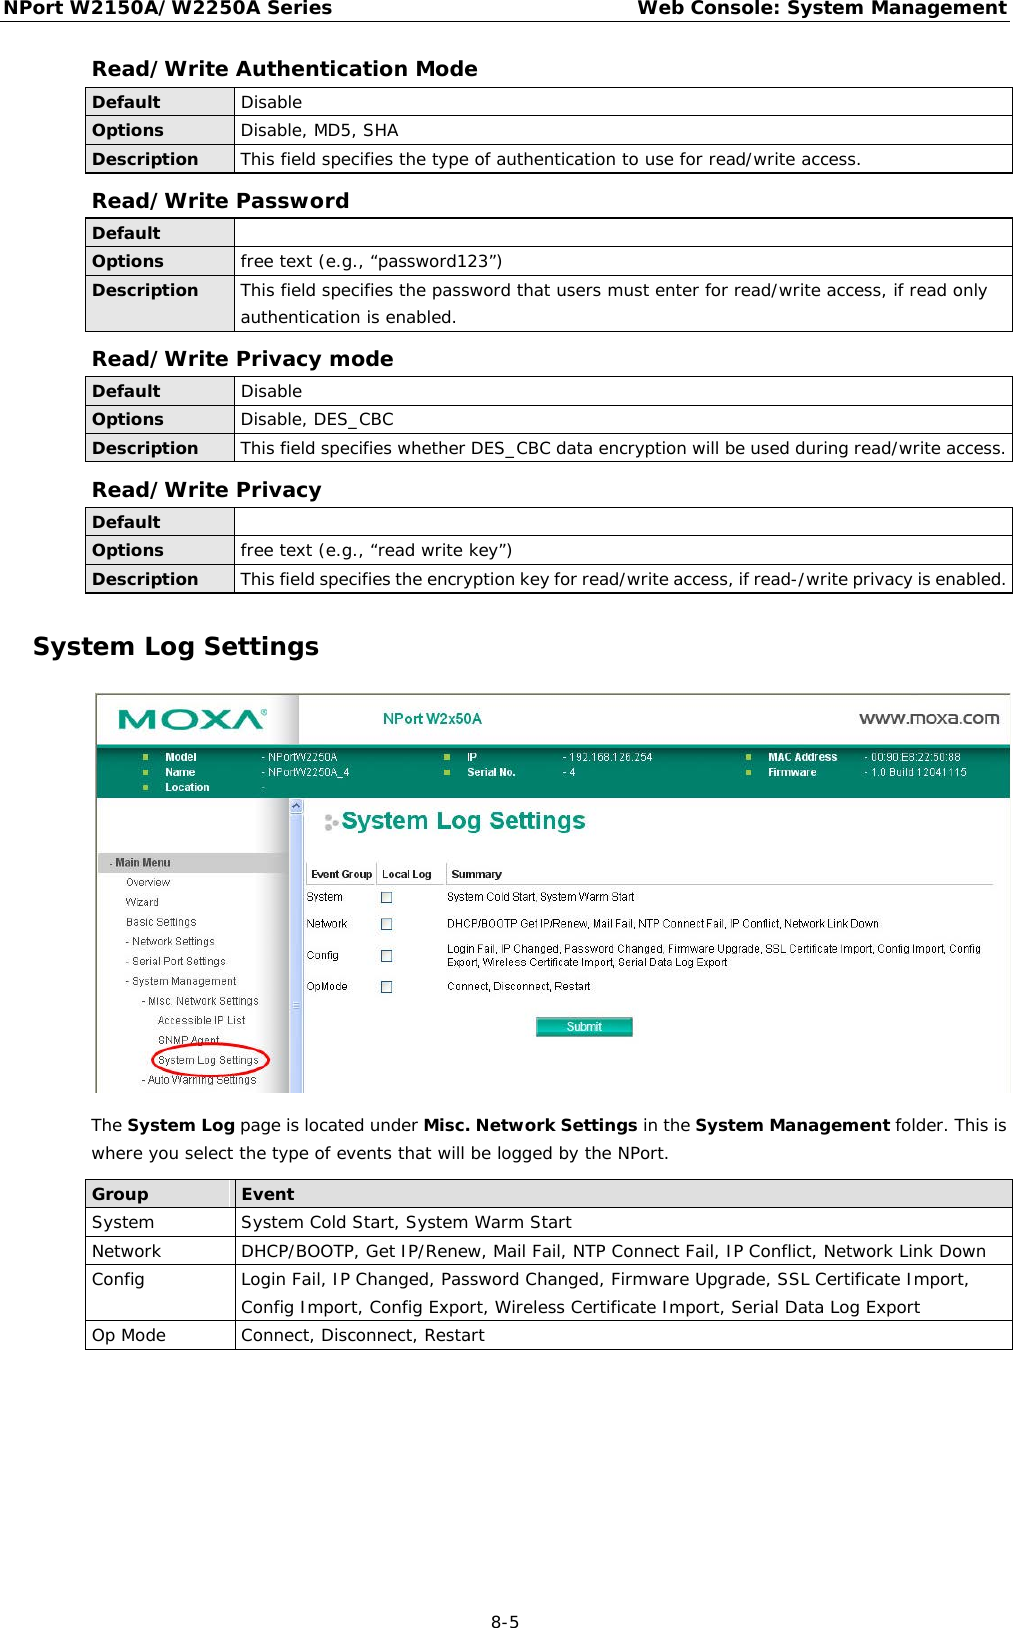 NPort W2150A/W2250A Series Web Console: System Management  8-5 Read/Write Authentication Mode Default Disable Options Disable, MD5, SHA Description This field specifies the type of authentication to use for read/write access. Read/Write Password Default   Options free text (e.g., “password123”) Description This field specifies the password that users must enter for read/write access, if read only authentication is enabled. Read/Write Privacy mode Default Disable Options Disable, DES_CBC Description This field specifies whether DES_CBC data encryption will be used during read/write access. Read/Write Privacy Default  Options free text (e.g., “read write key”) Description This field specifies the encryption key for read/write access, if read-/write privacy is enabled. System Log Settings  The System Log page is located under Misc. Network Settings in the System Management folder. This is where you select the type of events that will be logged by the NPort.  Group Event System System Cold Start, System Warm Start Network DHCP/BOOTP, Get IP/Renew, Mail Fail, NTP Connect Fail, IP Conflict, Network Link Down Config Login Fail, IP Changed, Password Changed, Firmware Upgrade, SSL Certificate Import, Config Import, Config Export, Wireless Certificate Import, Serial Data Log Export Op Mode Connect, Disconnect, Restart 